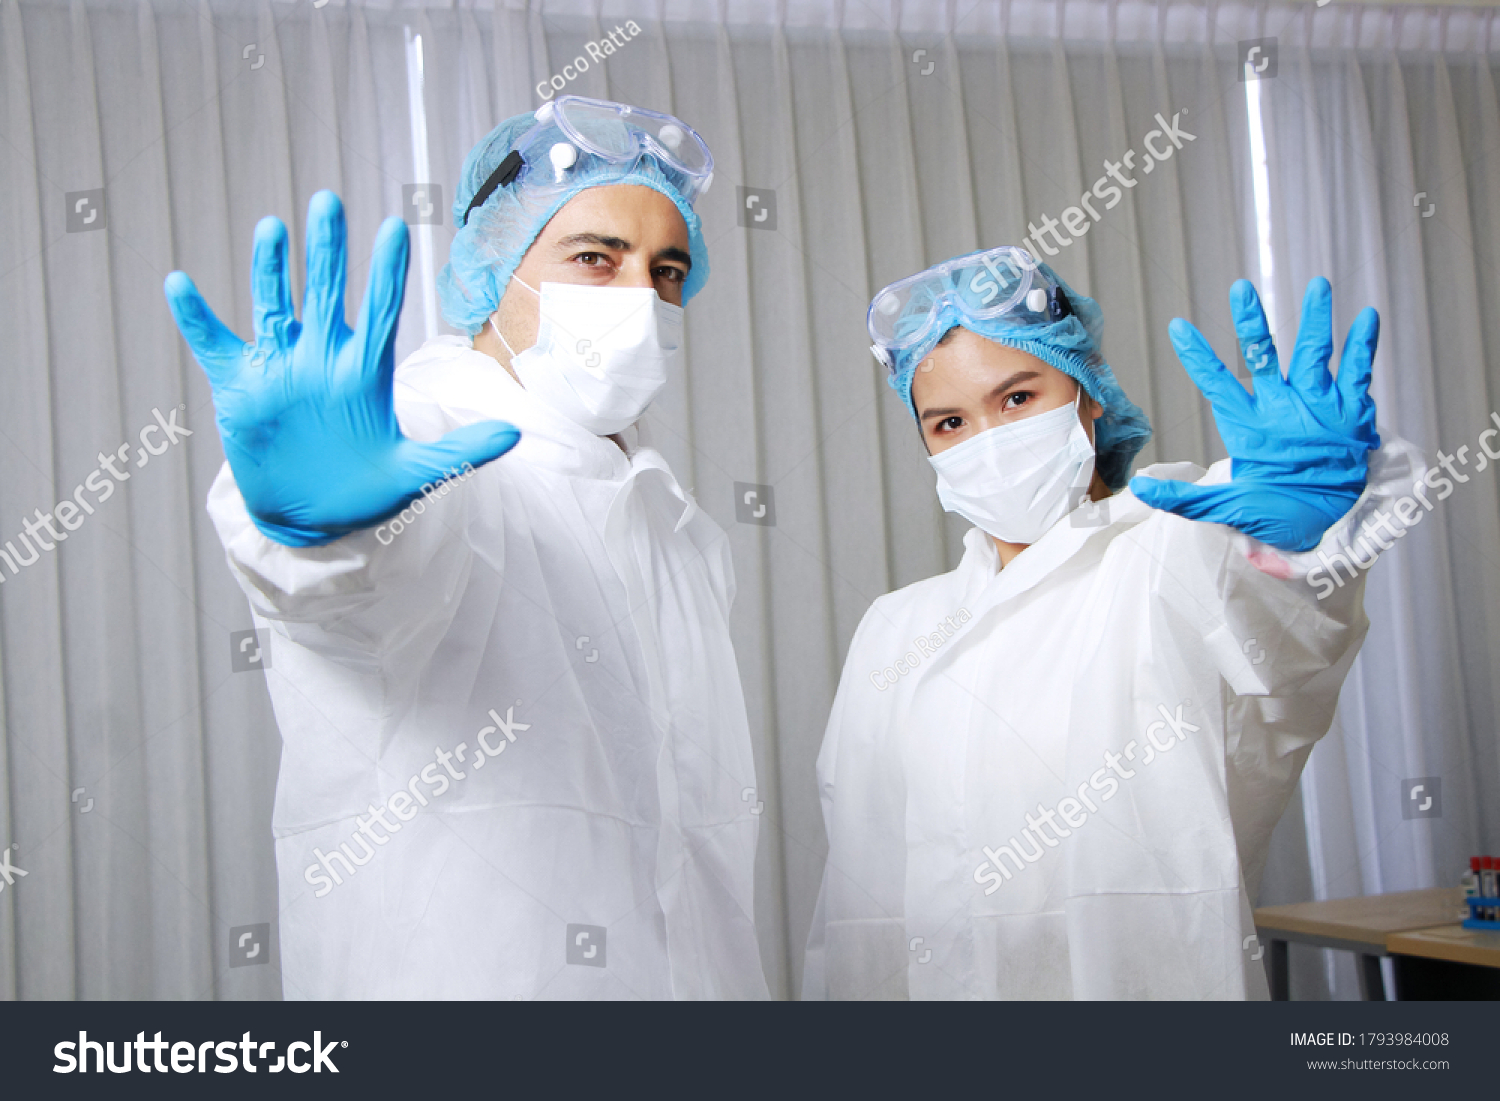 Powerful of Medical team in Personal Protective Equipment or PPE clothing and Healing for patient and showing stop hand sign for Covid-19 virus pathogens and inhibit the spread of germs. #1793984008